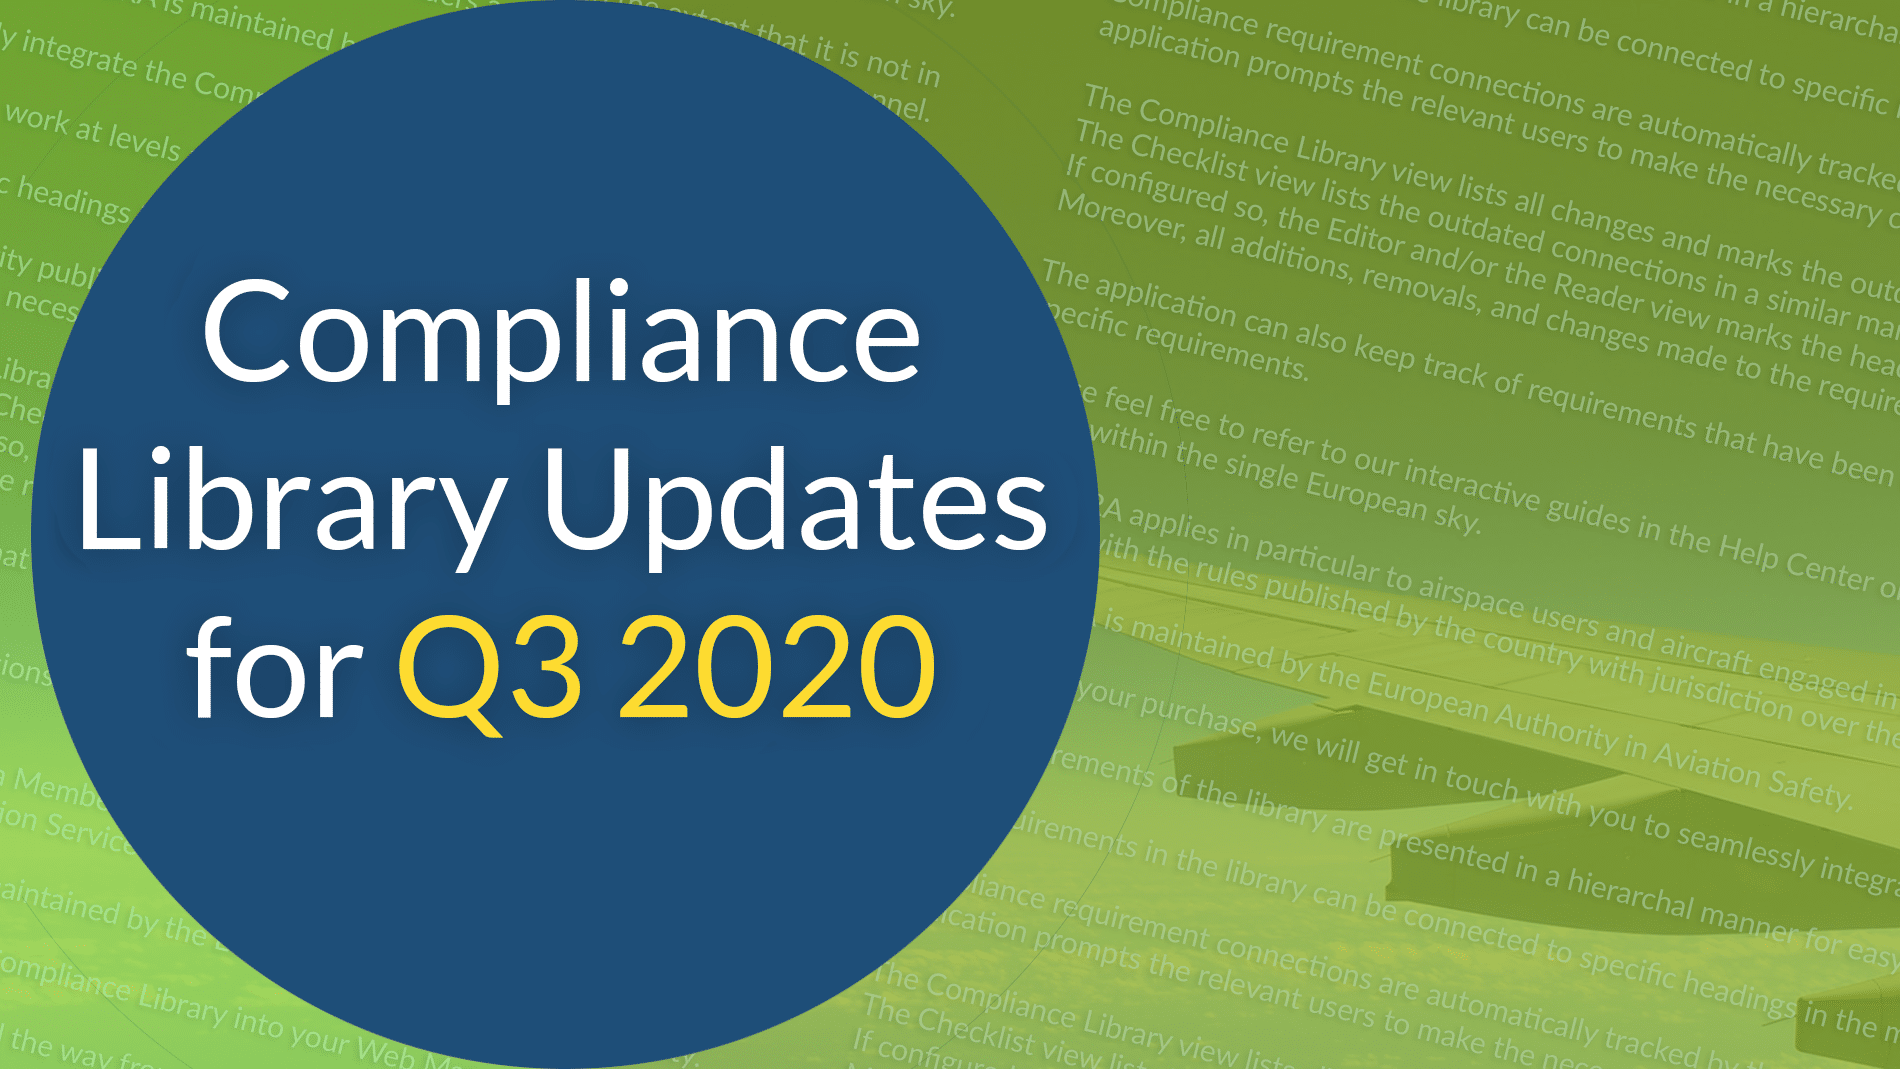 compliance libraries updates during Q3